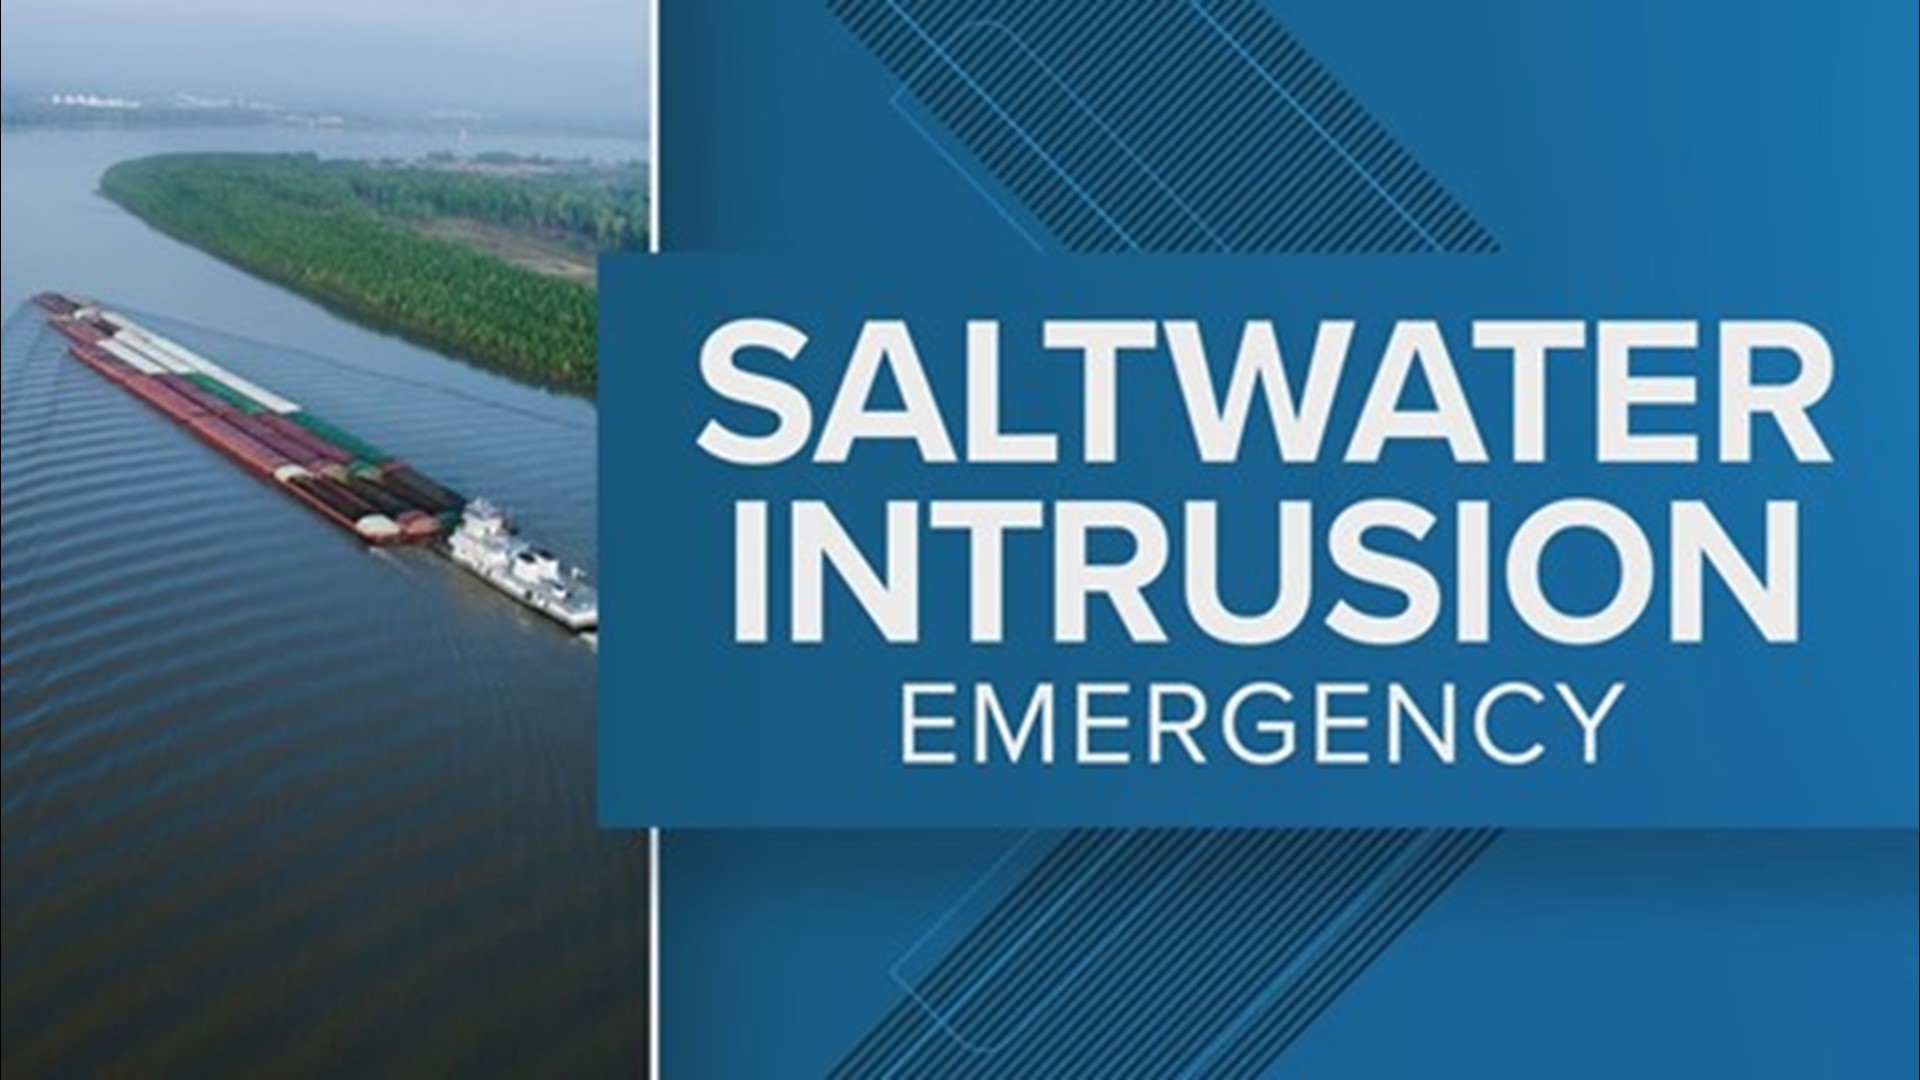 WWL-TV with the latest update on the saltwater intrusion emergency in Southeast Louisiana as seen on Eyewitness News at noon on Monday, Sept. 25, 2023.